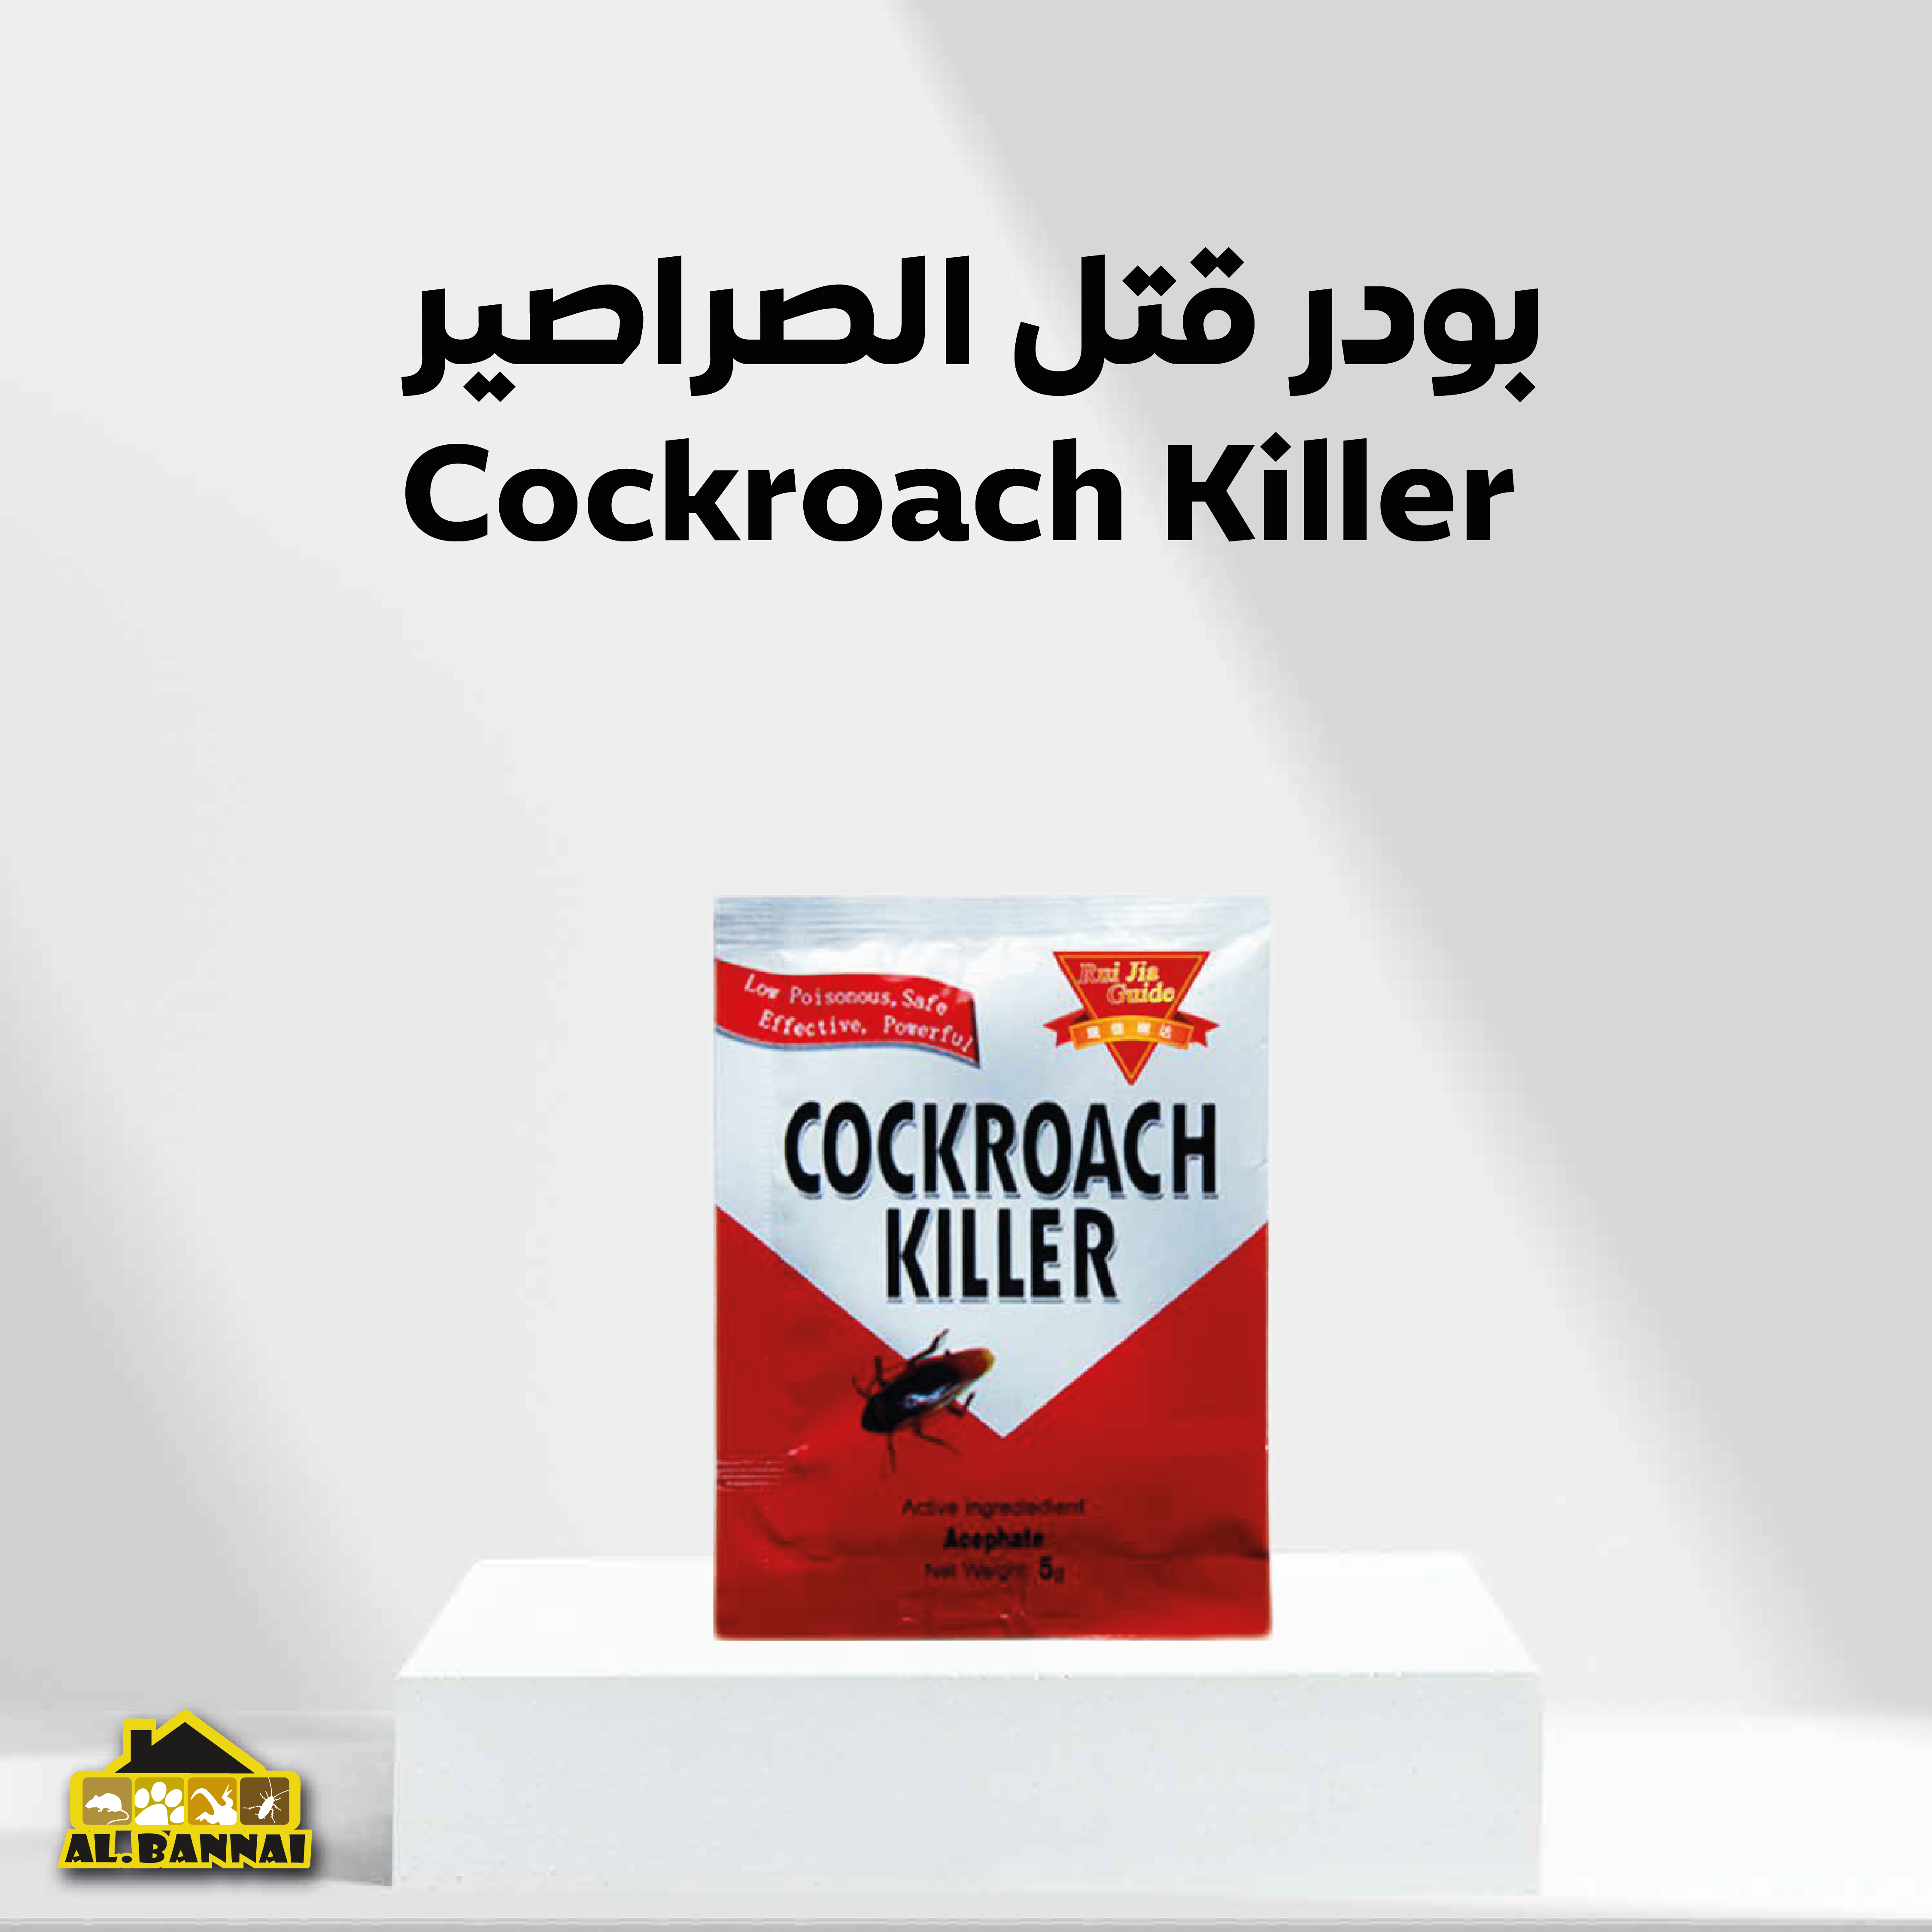 Buy Cockroach Killer Powder Online | Construction Cleaning and Services | Qetaat.com